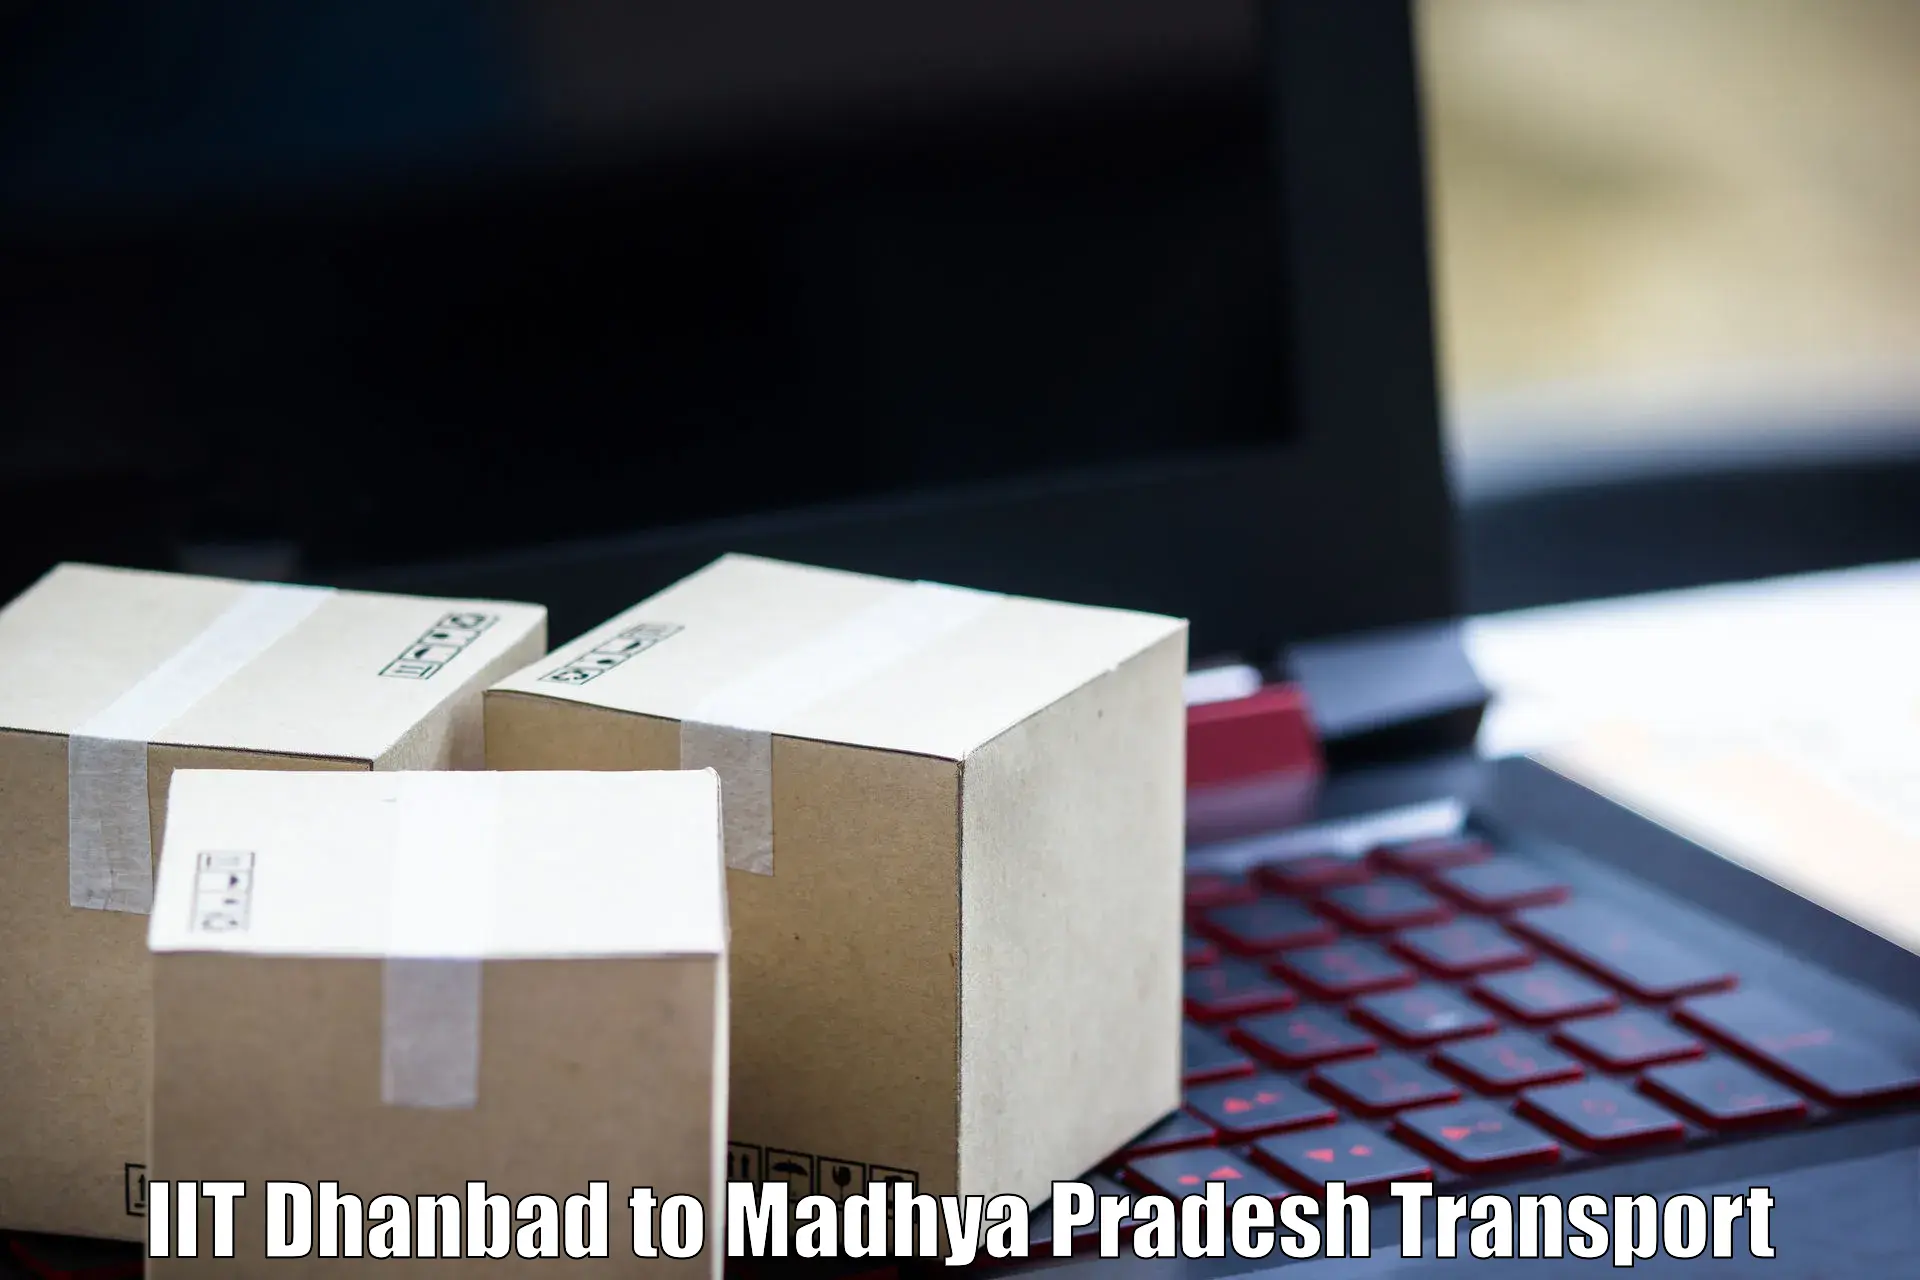 Nationwide transport services IIT Dhanbad to Chanderi